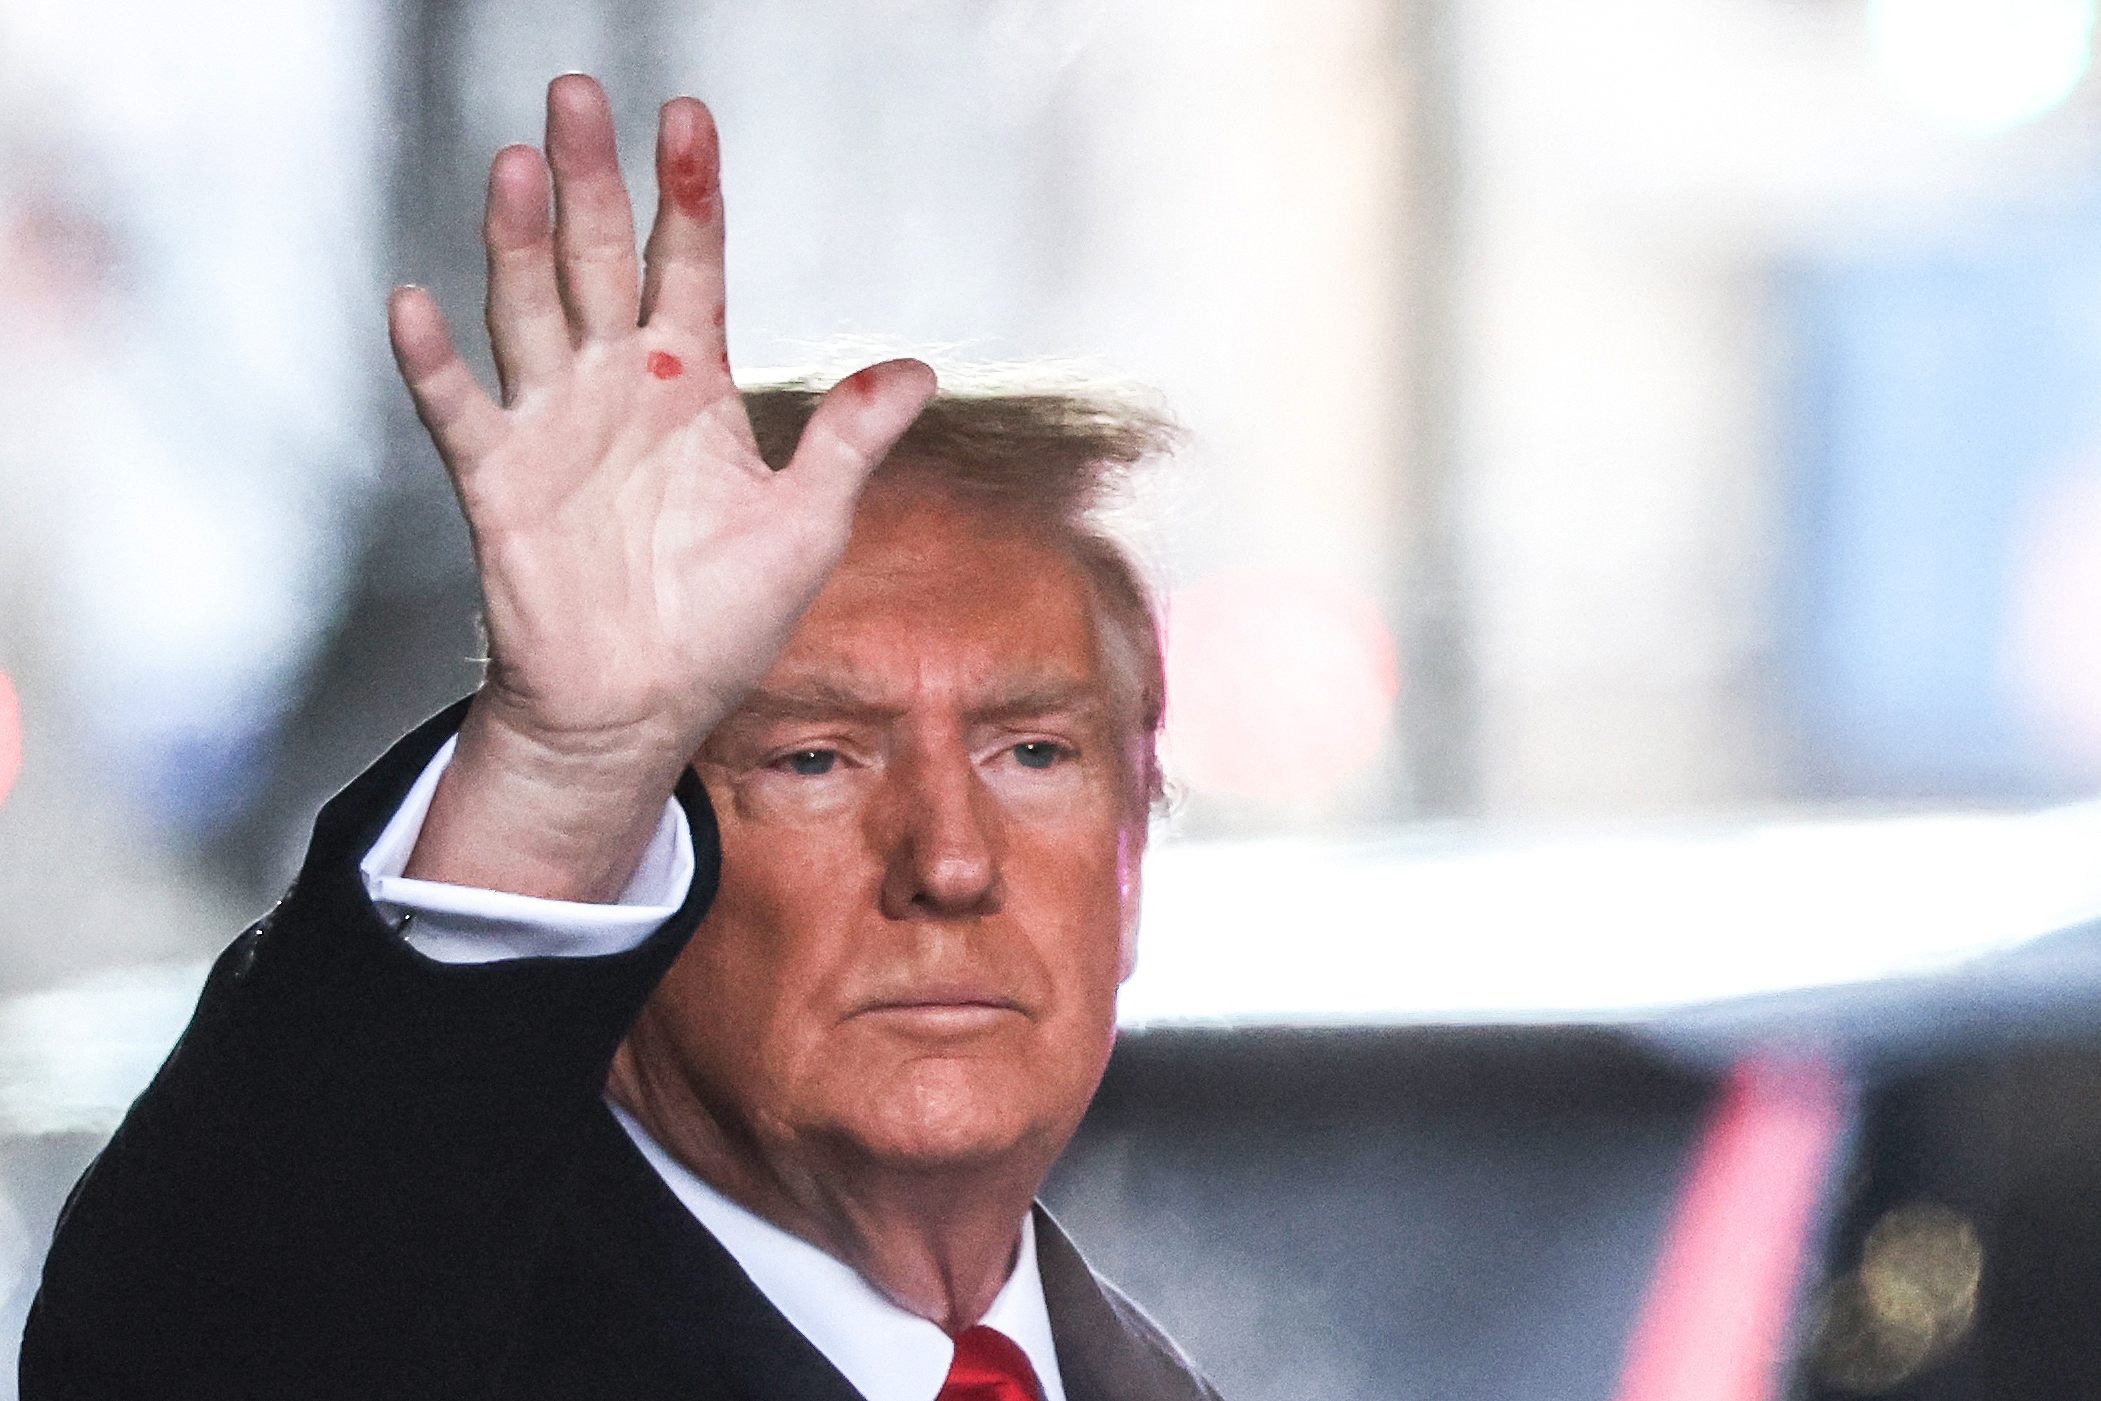 Donald Trump s Red Spotted Hand in Photo Sparks Speculation Newsweek